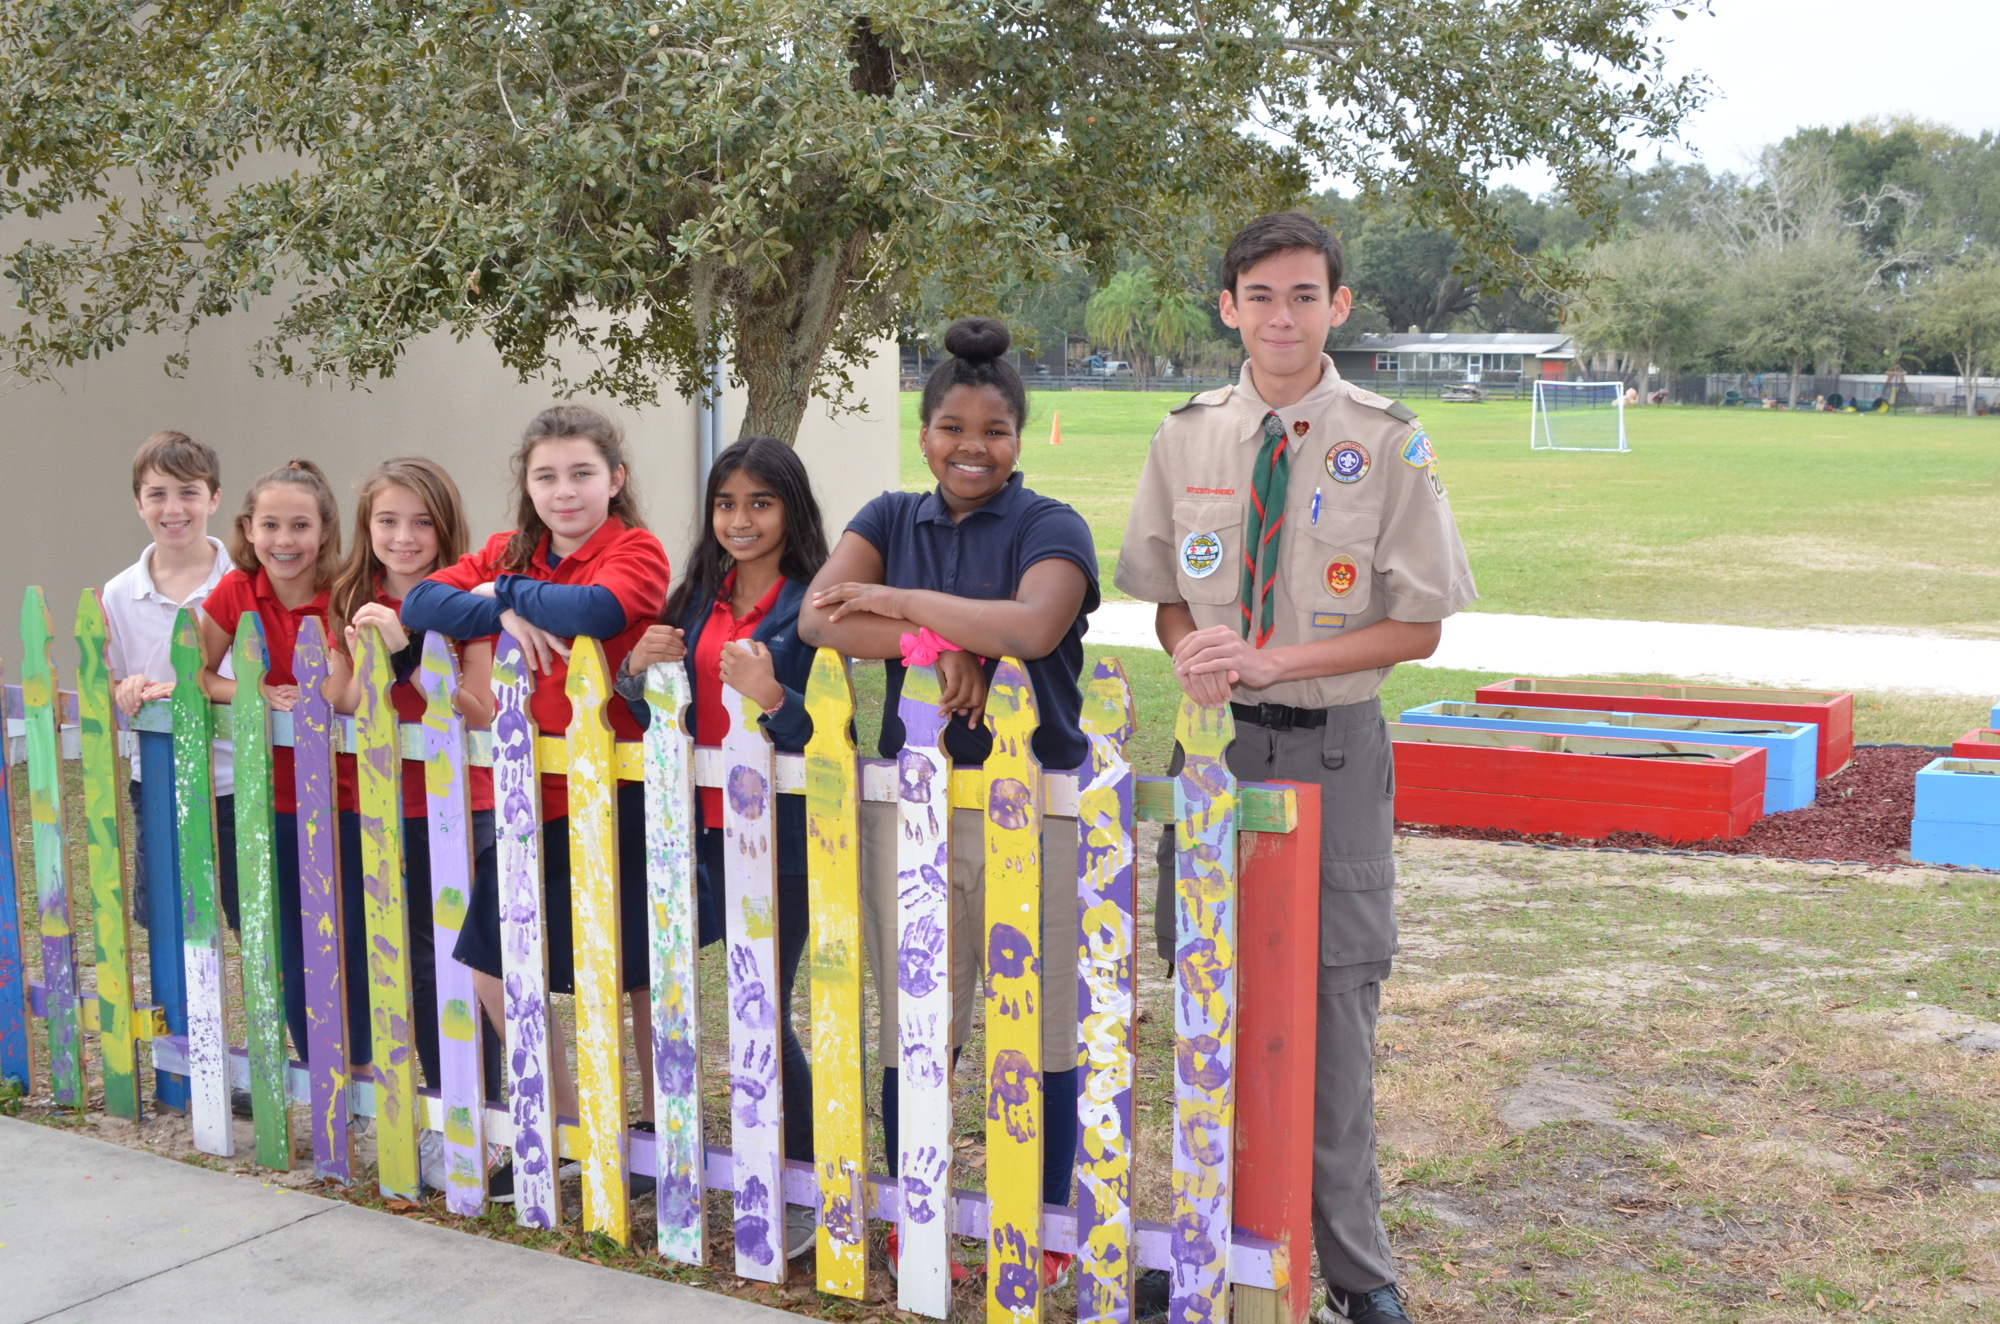 Eagle scout candidate Jonathan Le Morvan, right, with the fifth graders who painted the picket fence near the garden: Hayden Dalton, left, Kenleigh Swindle, Reagan Rittenberry, Ariceli Resto, Natalia Sant and Kiana Grant.